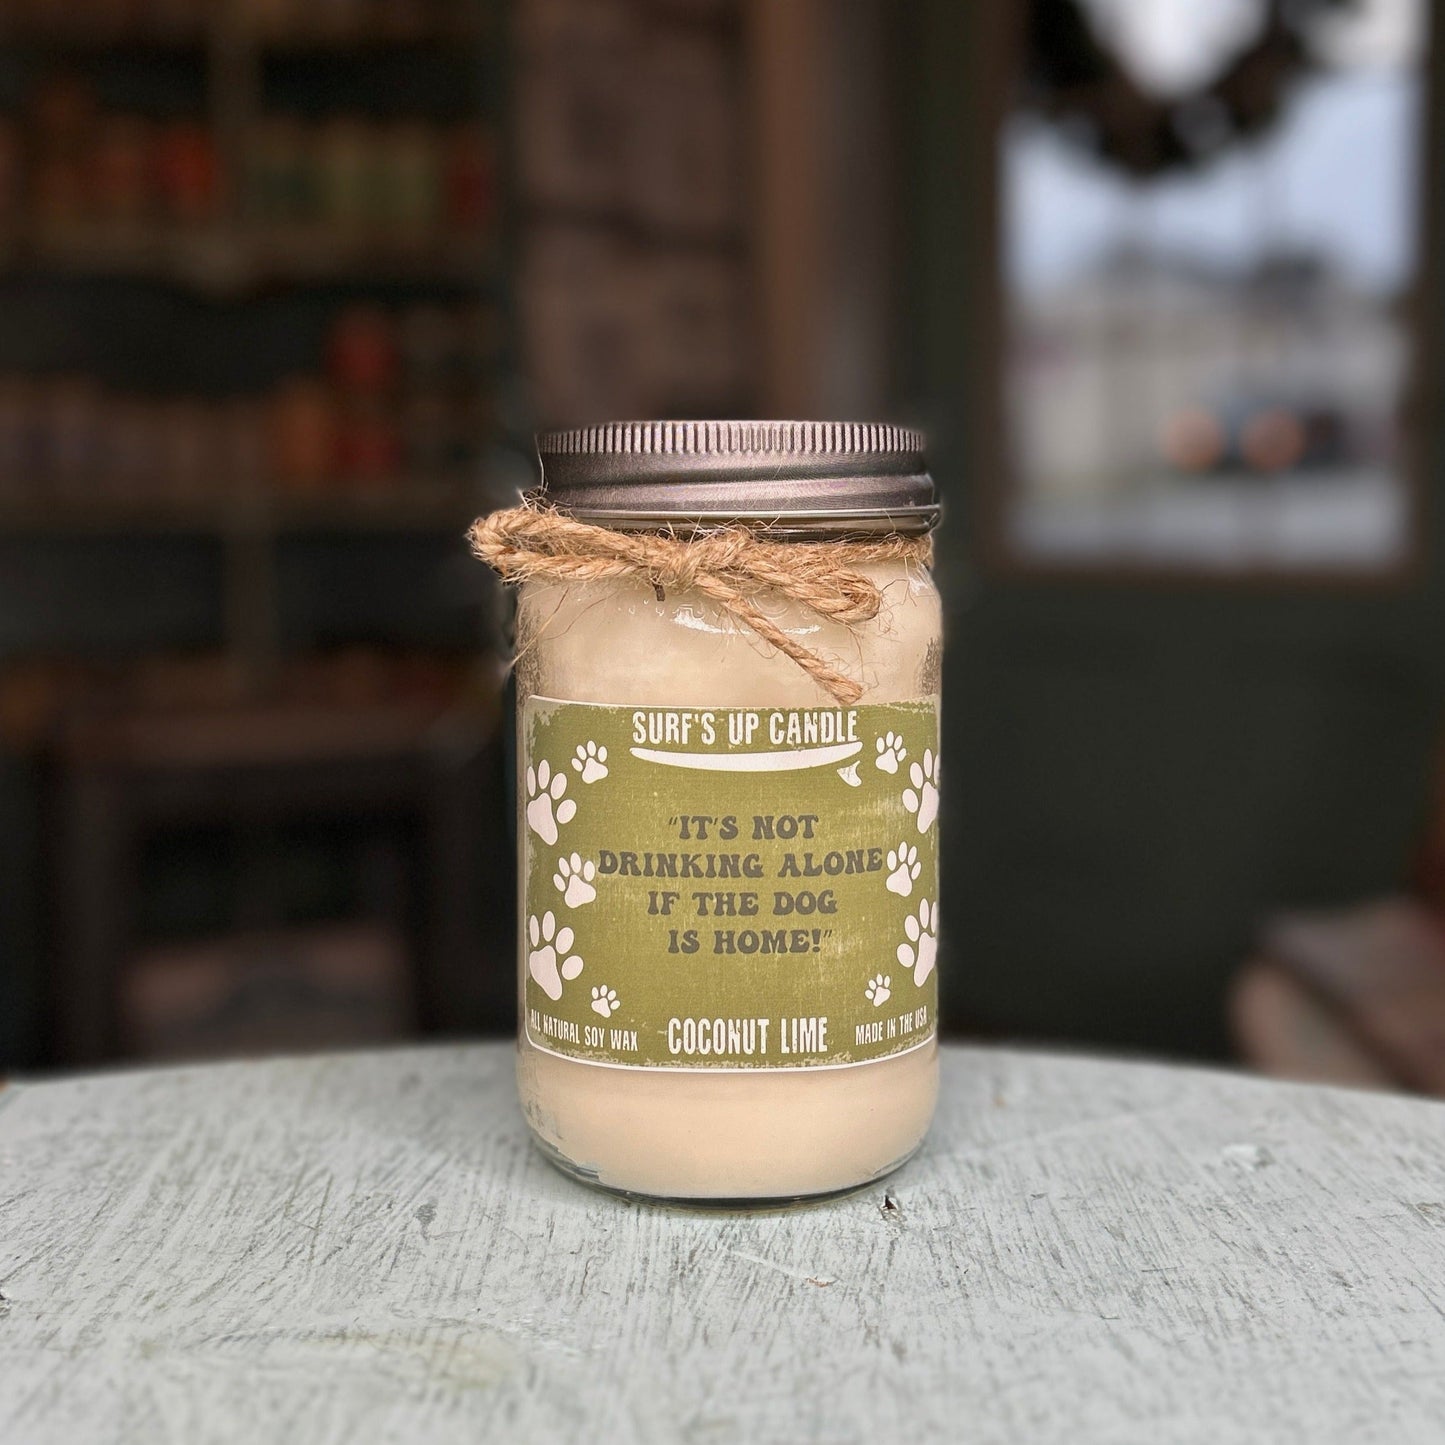 Drinking Alone Coconut Lime Mason Jar Candle - Paw-some Scents Collection